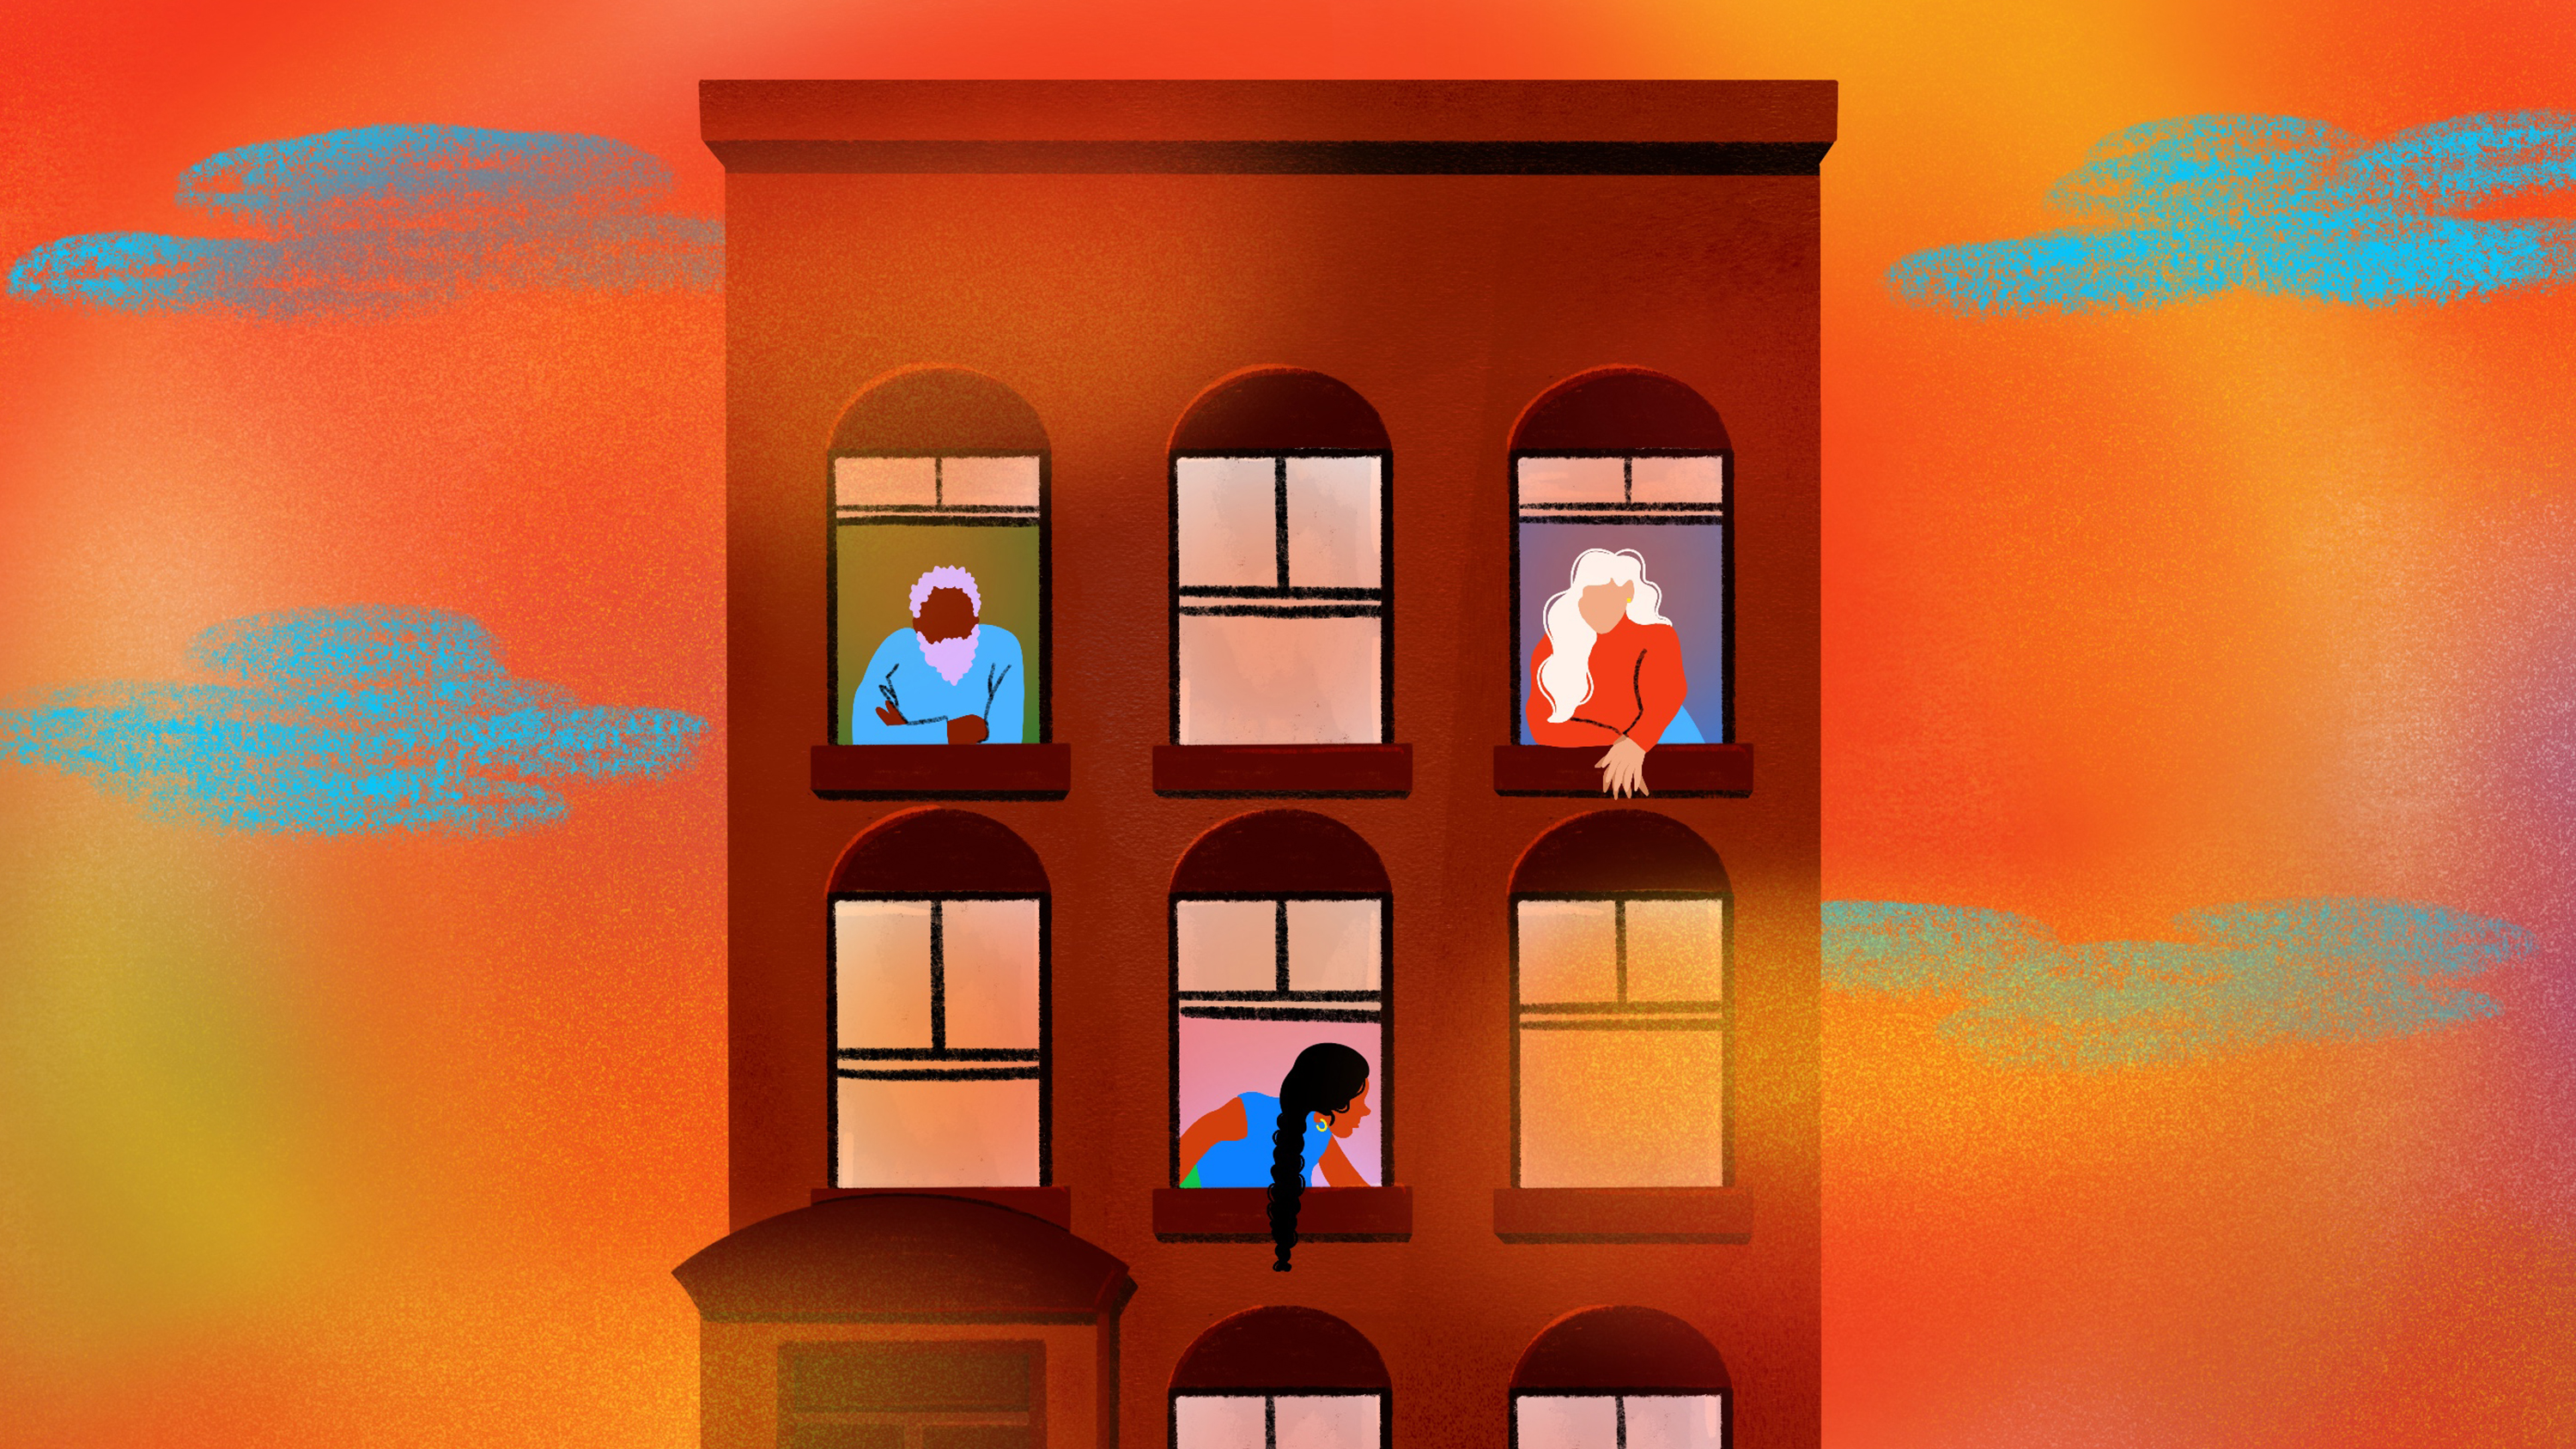 An illustration shows a tall apartment building with a heat-evoking orange background and wisps of blue smoke passing in front of it. In the building’s windows, various people look outside or perform chores inside.